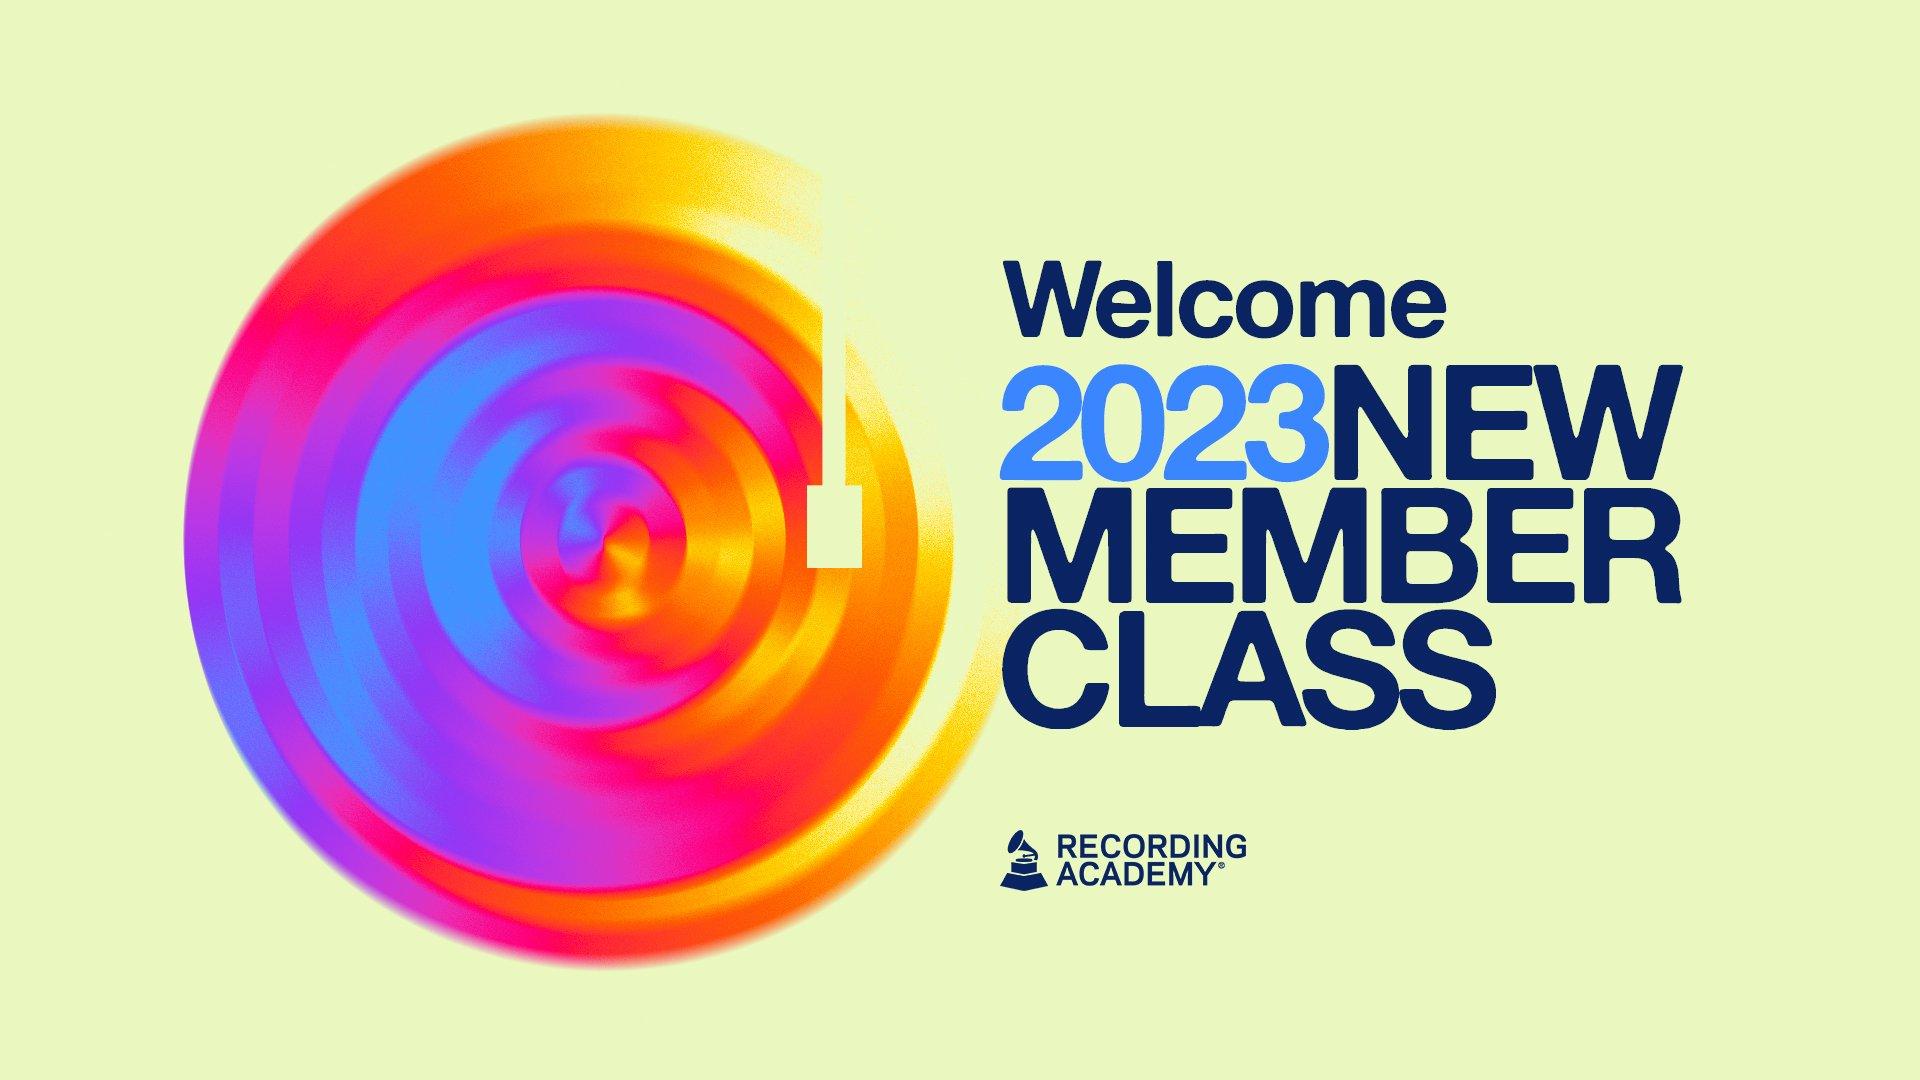 Graphic announcing the Recording Academy's 2023 New Member Class invitees